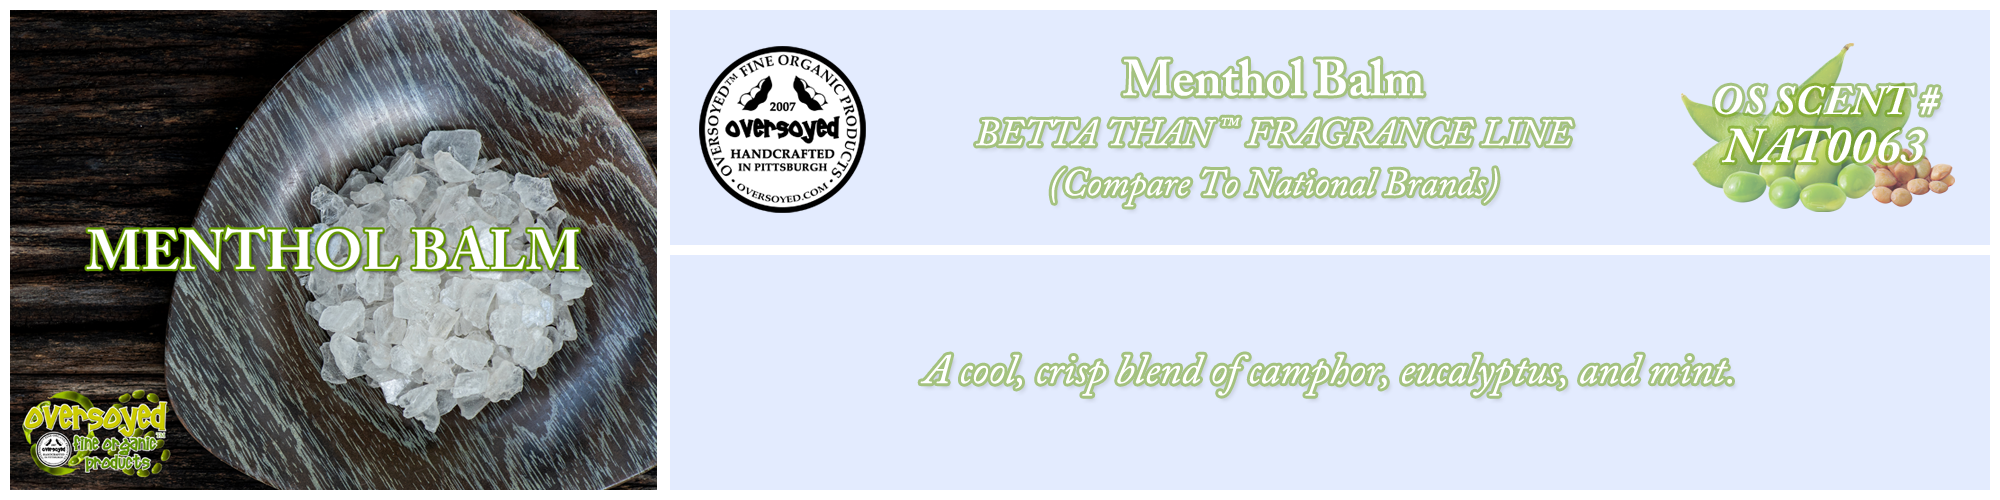 Menthol Balm Handcrafted Products Collection